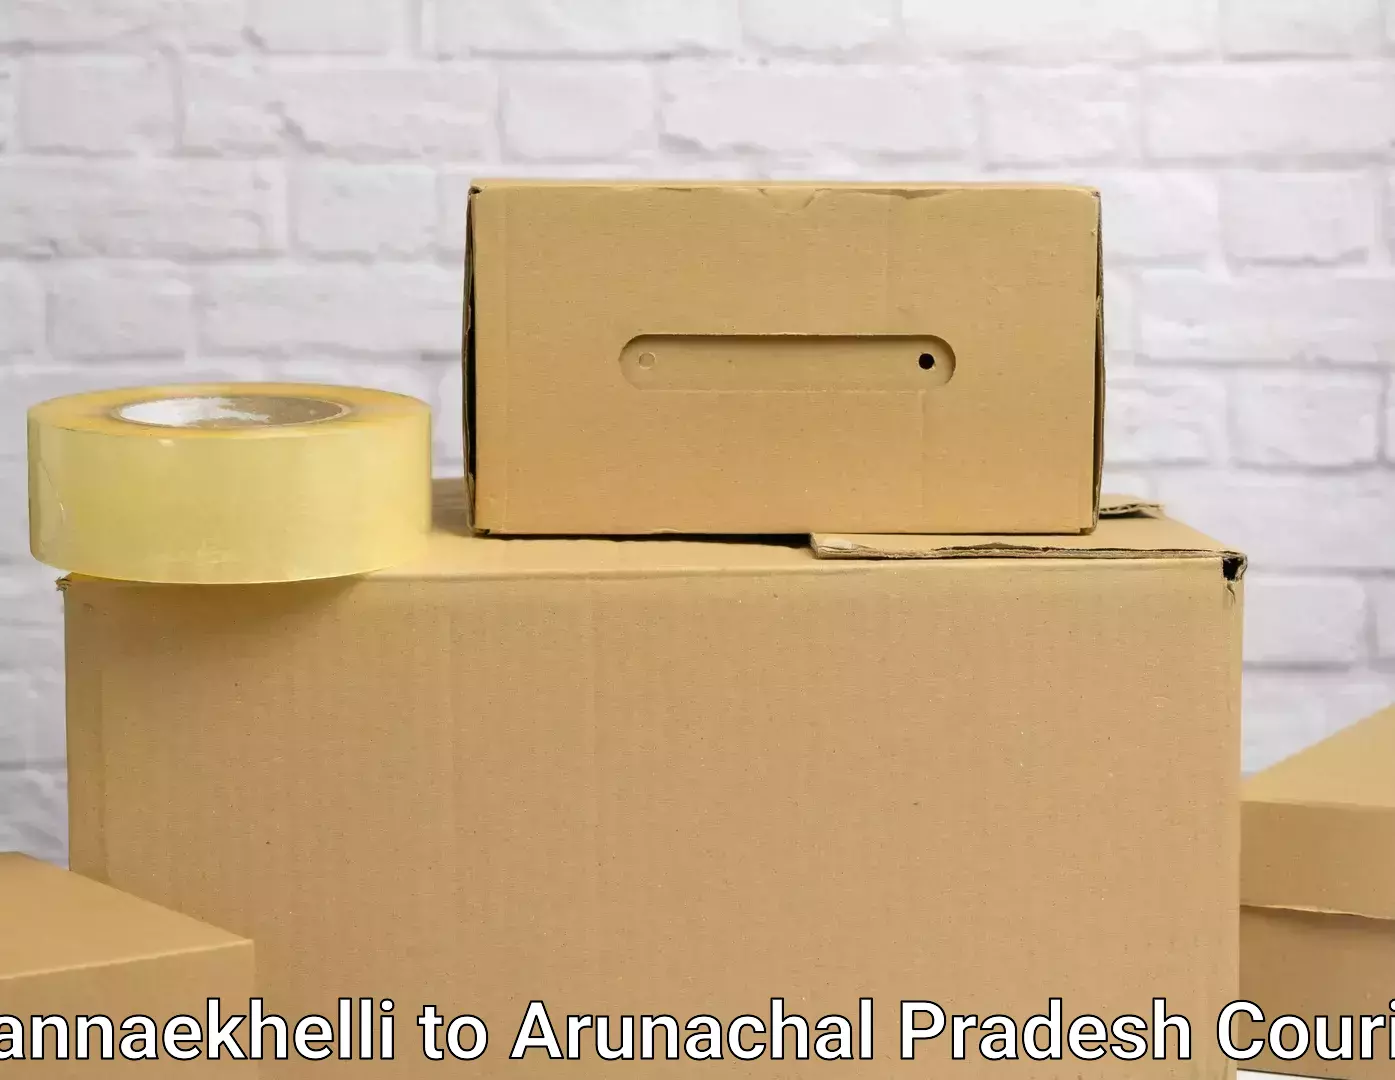 High-quality moving services Mannaekhelli to Roing